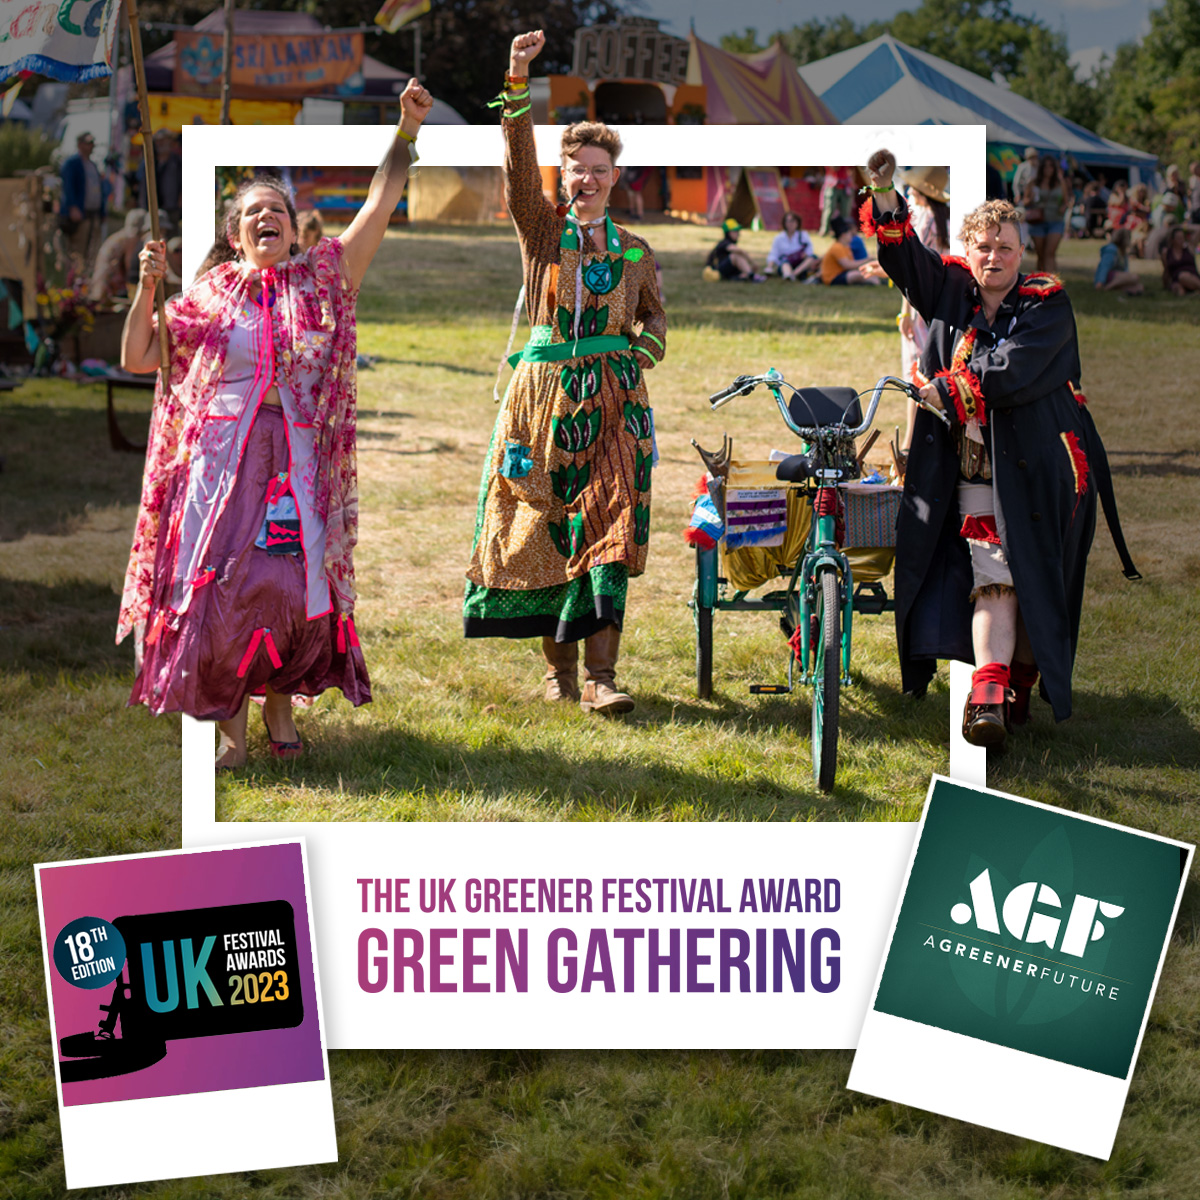 At last night's @festival_awards , we were proud to present @GreenGathering_  with The UK Greener Festival Award for the 2nd year in a row! Congratulations!
#UKFA23 #greengathering #agreenerfestival #AGF